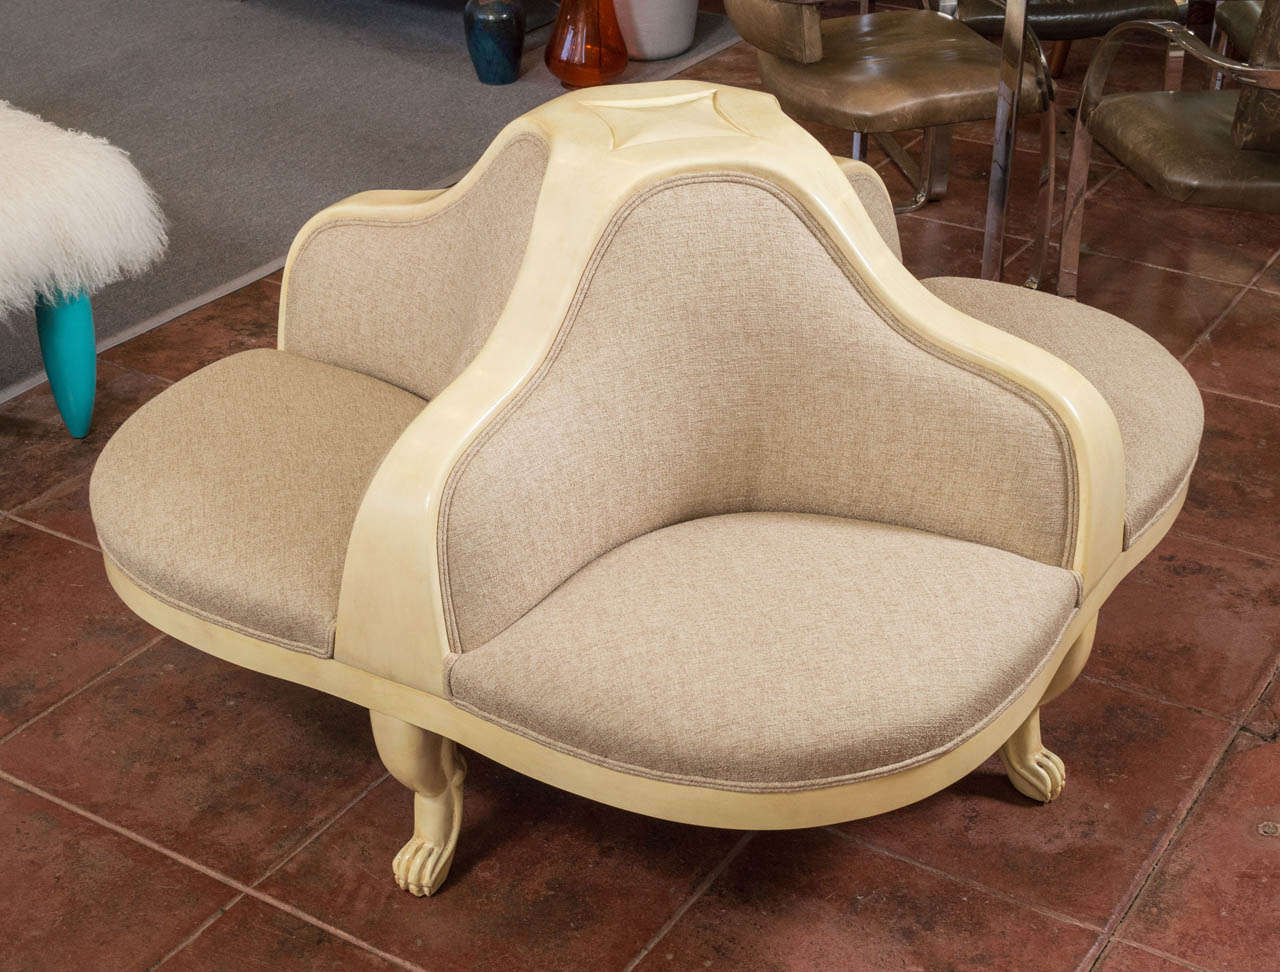 This style of seating originated in France, in the 1850's, this one is from circa 1930's. It's been restored, refinished and reupholstered, with the frame in a Yellowy cream and the upholstery a light tan. Nice details from the claw foot legs, to